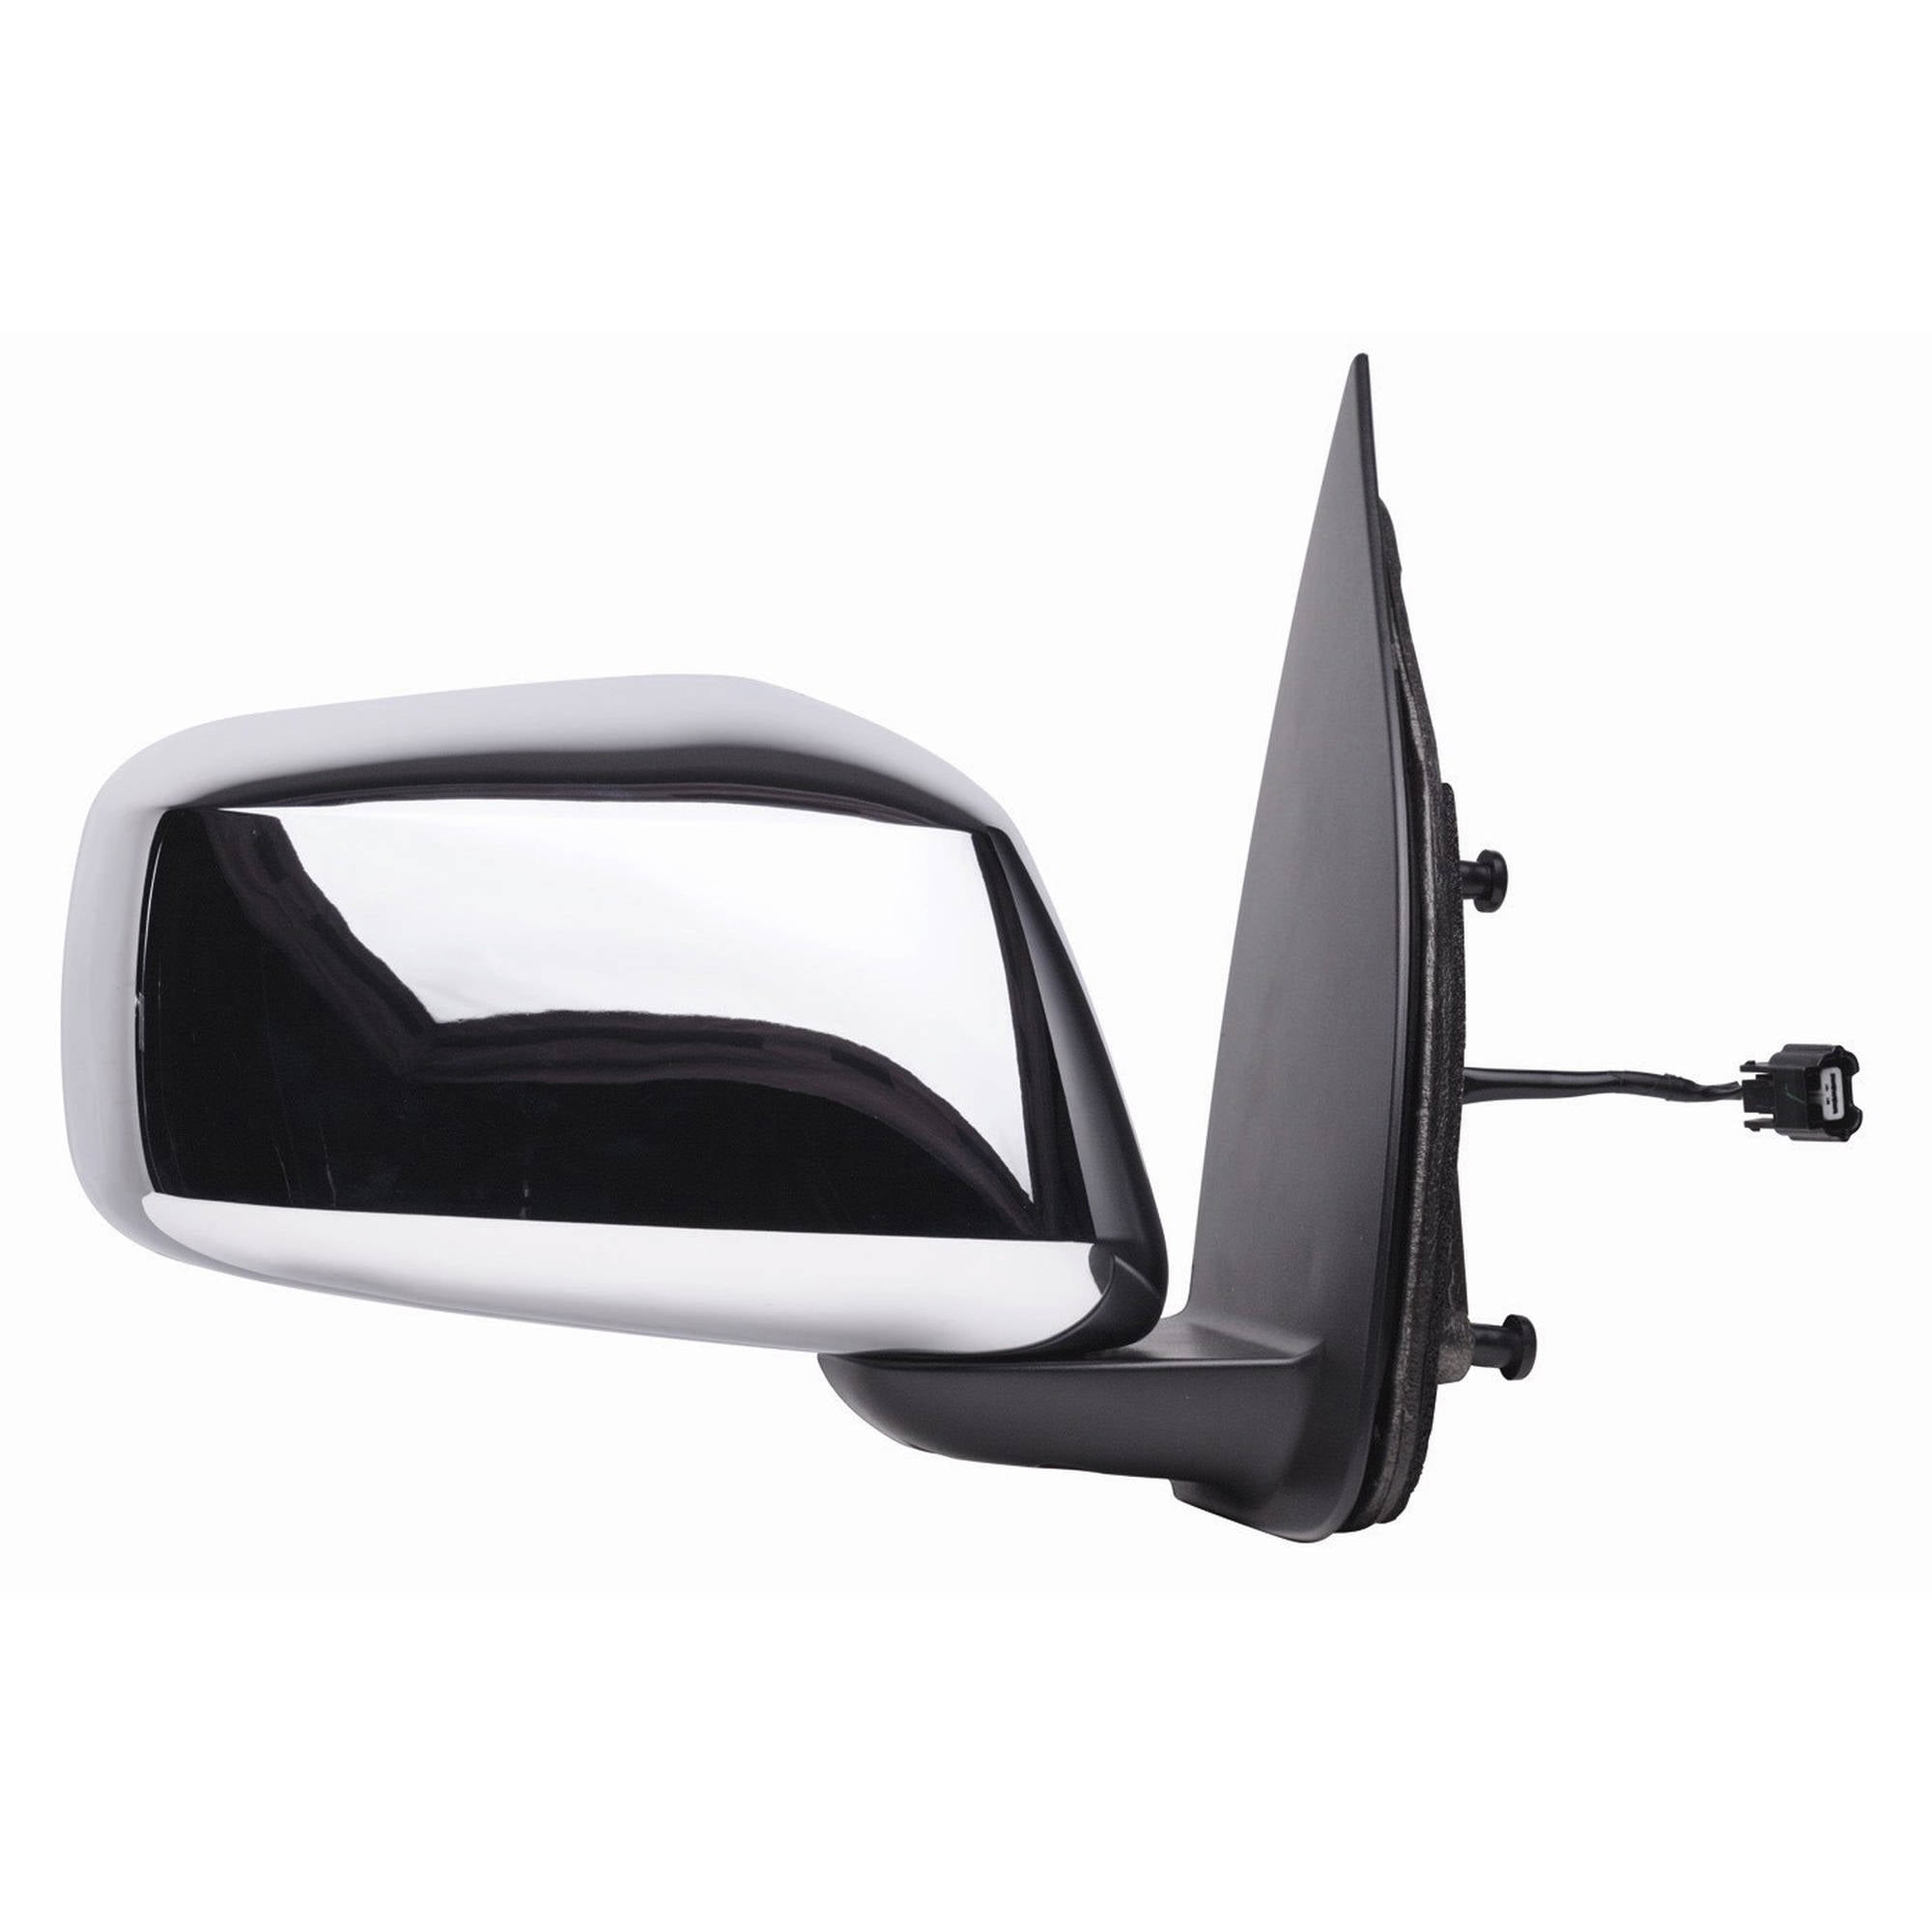 New Passenger Side Manual Mirror For 05-18 Frontier 05-15 Xterra NI1321154 